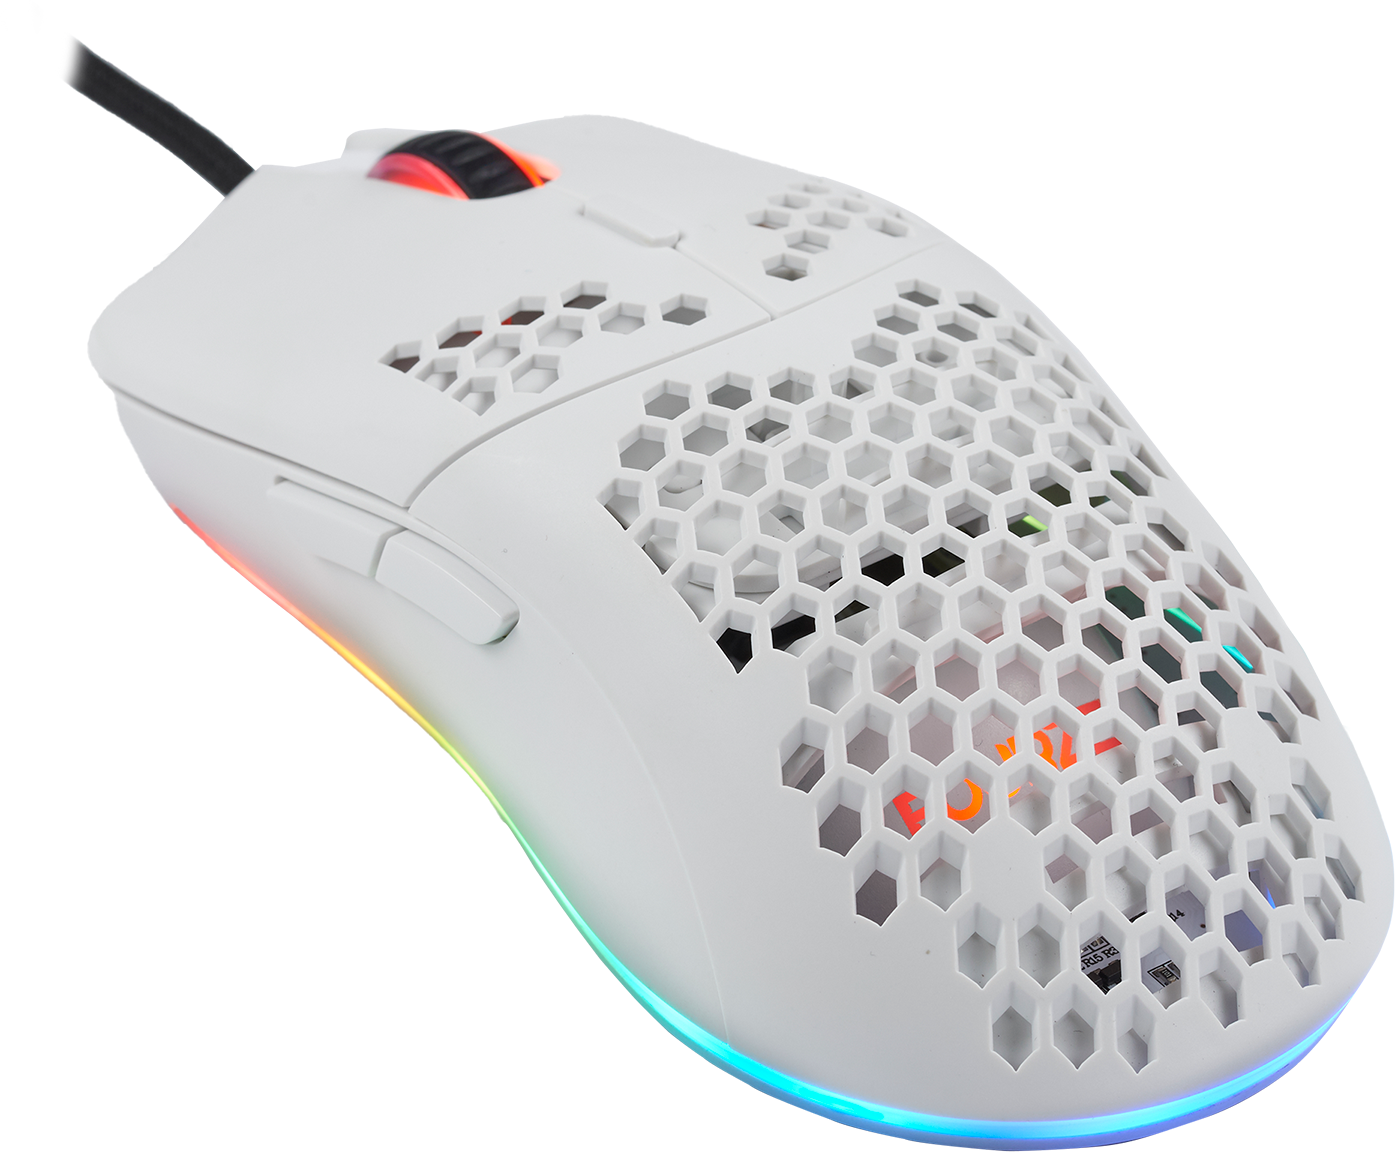 5713552000880 Fourze GM800 Gaming Mouse RGB Pearl White - Gaming mus Computer & IT,Gaming,Gaming mus 3400003410 FZ-GM800-002